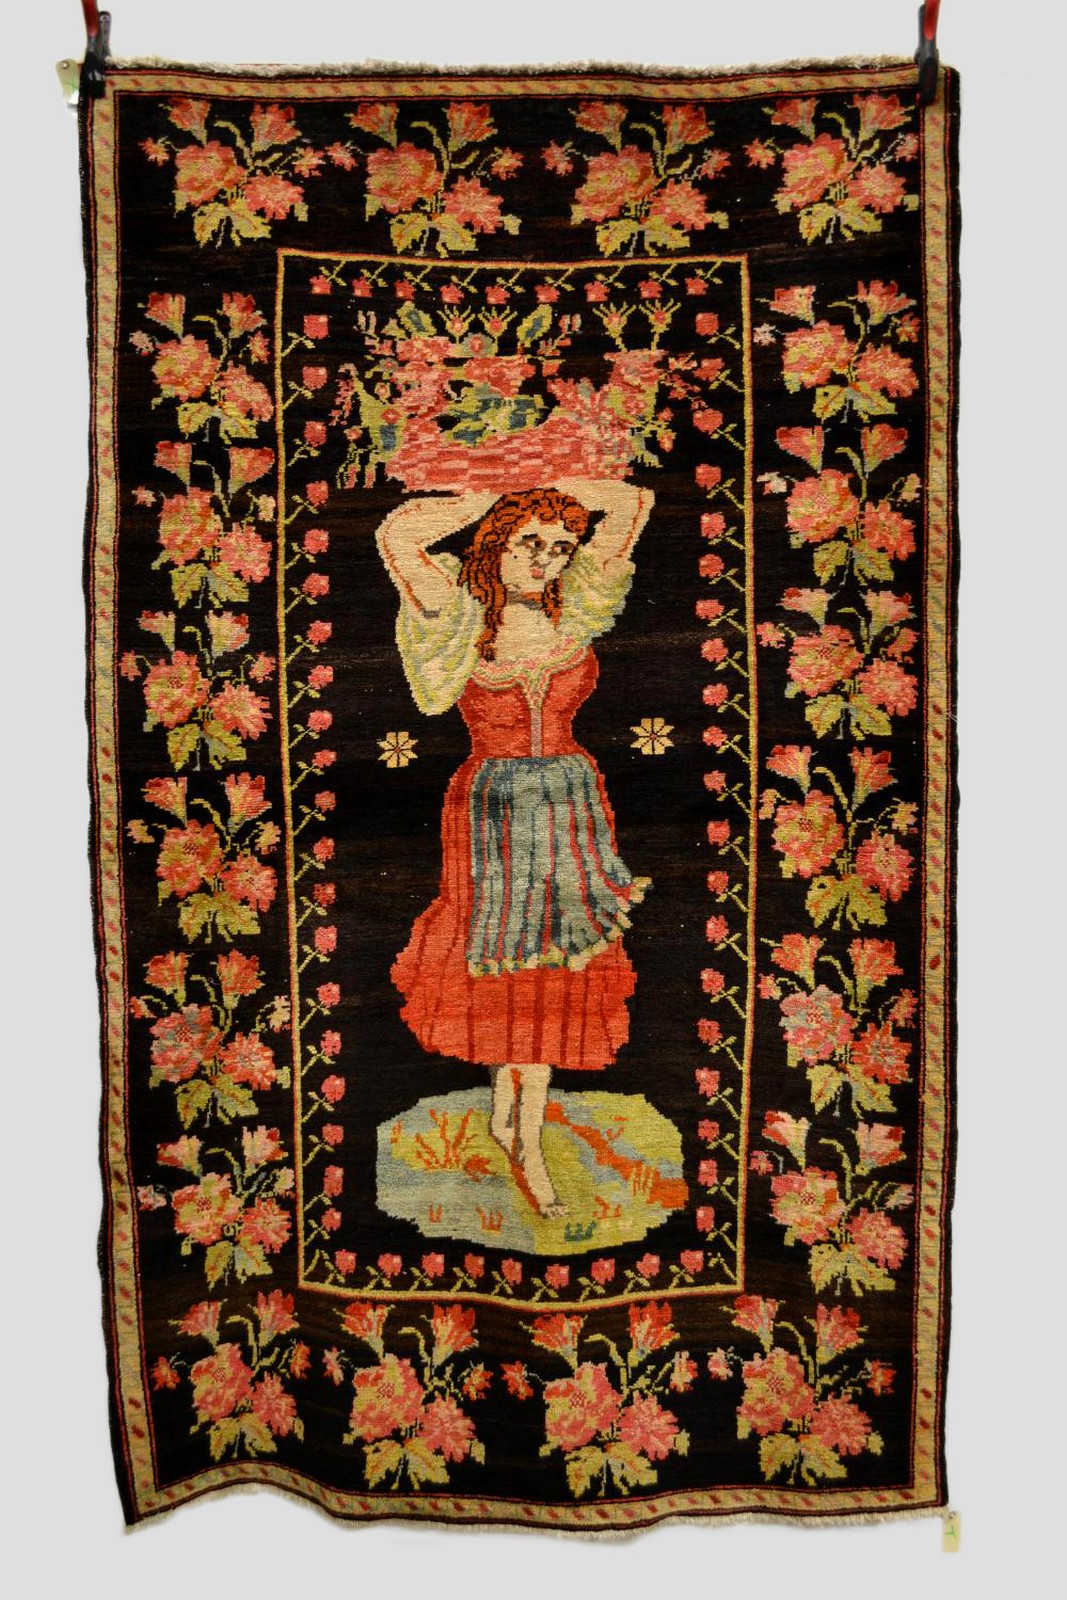 Karabakh pictorial rug, south west Caucasus, 20th century, 7ft. 6in. x 4ft. 6in. 2.29m. x 1.37m.